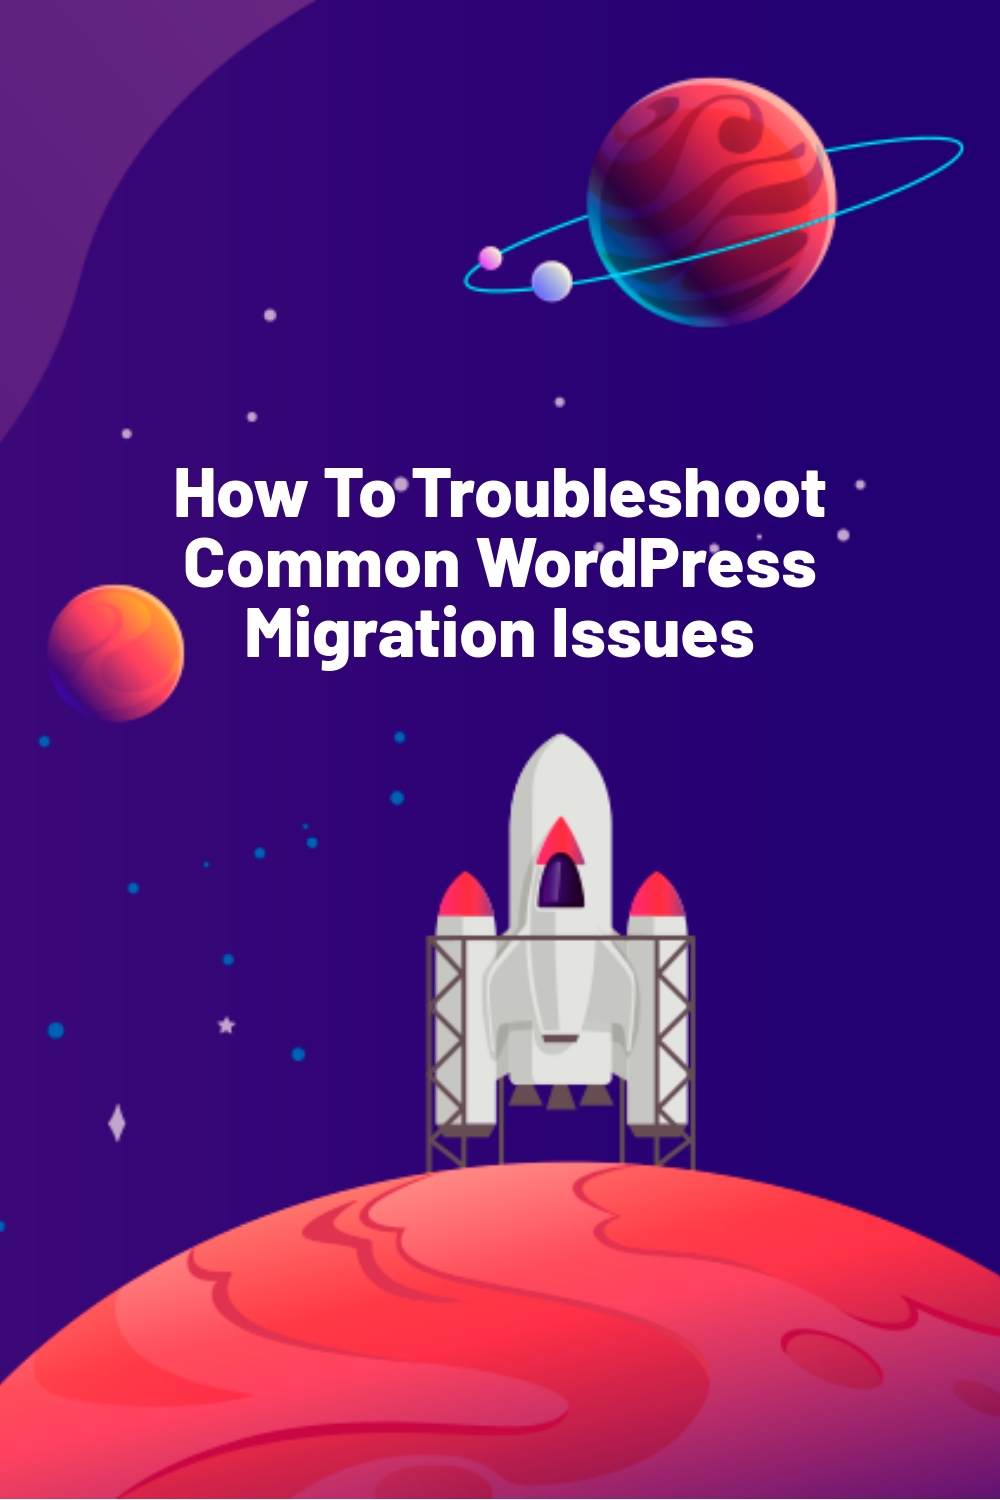 How To Troubleshoot Common WordPress Migration Issues